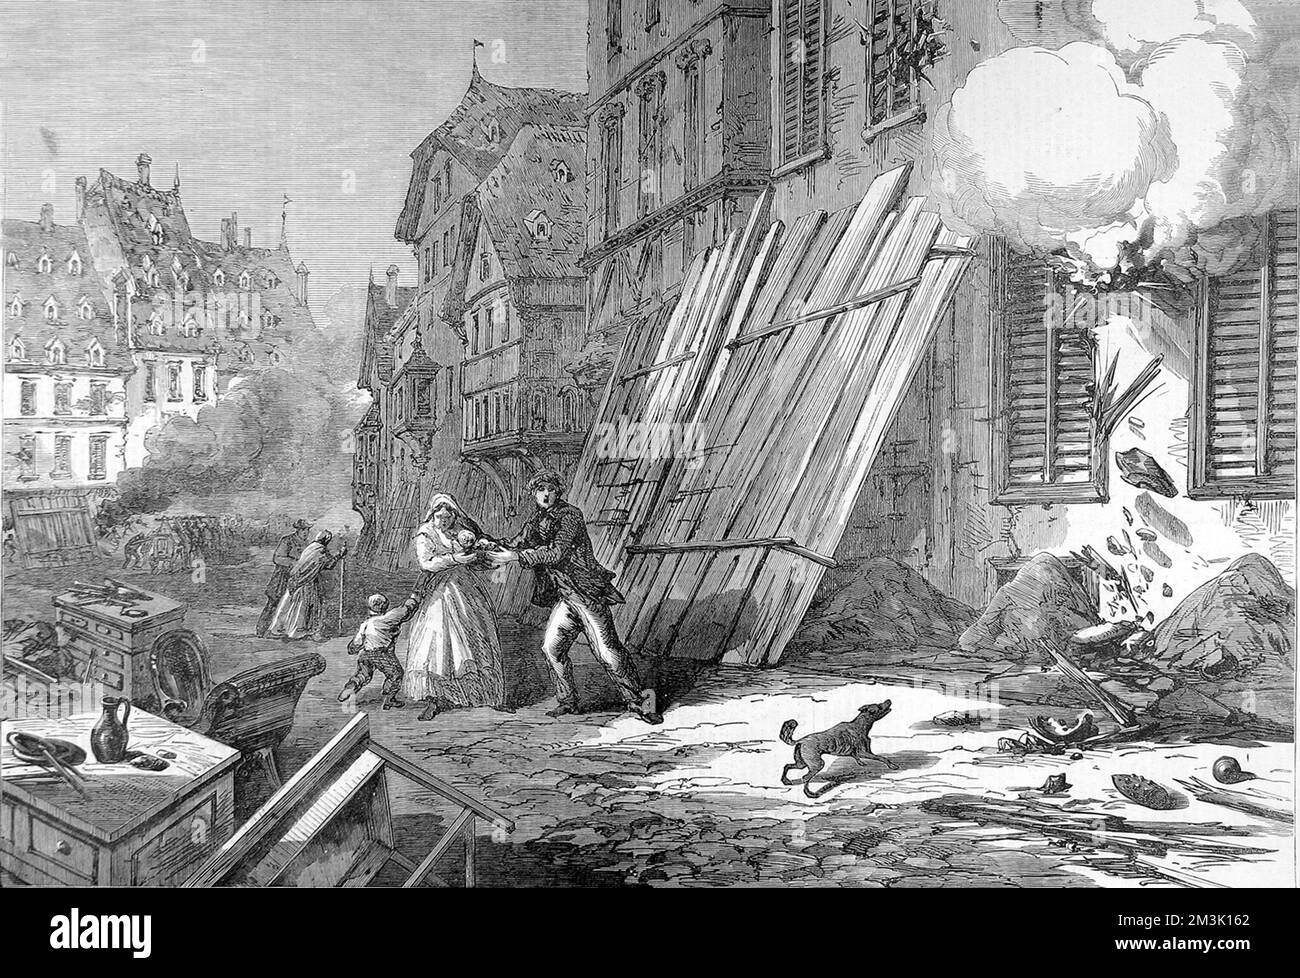 Between August the 4th and 6th 1870 Crown Prince Frederick of Prussia defeated French Marshal MacMahon at Worth and Weissenburg, pushing him out of Alsace and surrounding Strasbourg. This scene at Strasbourg of damaged buildings and families under fire vividly captures the impact of the war on ordinary people.     Date: 1870 Stock Photo